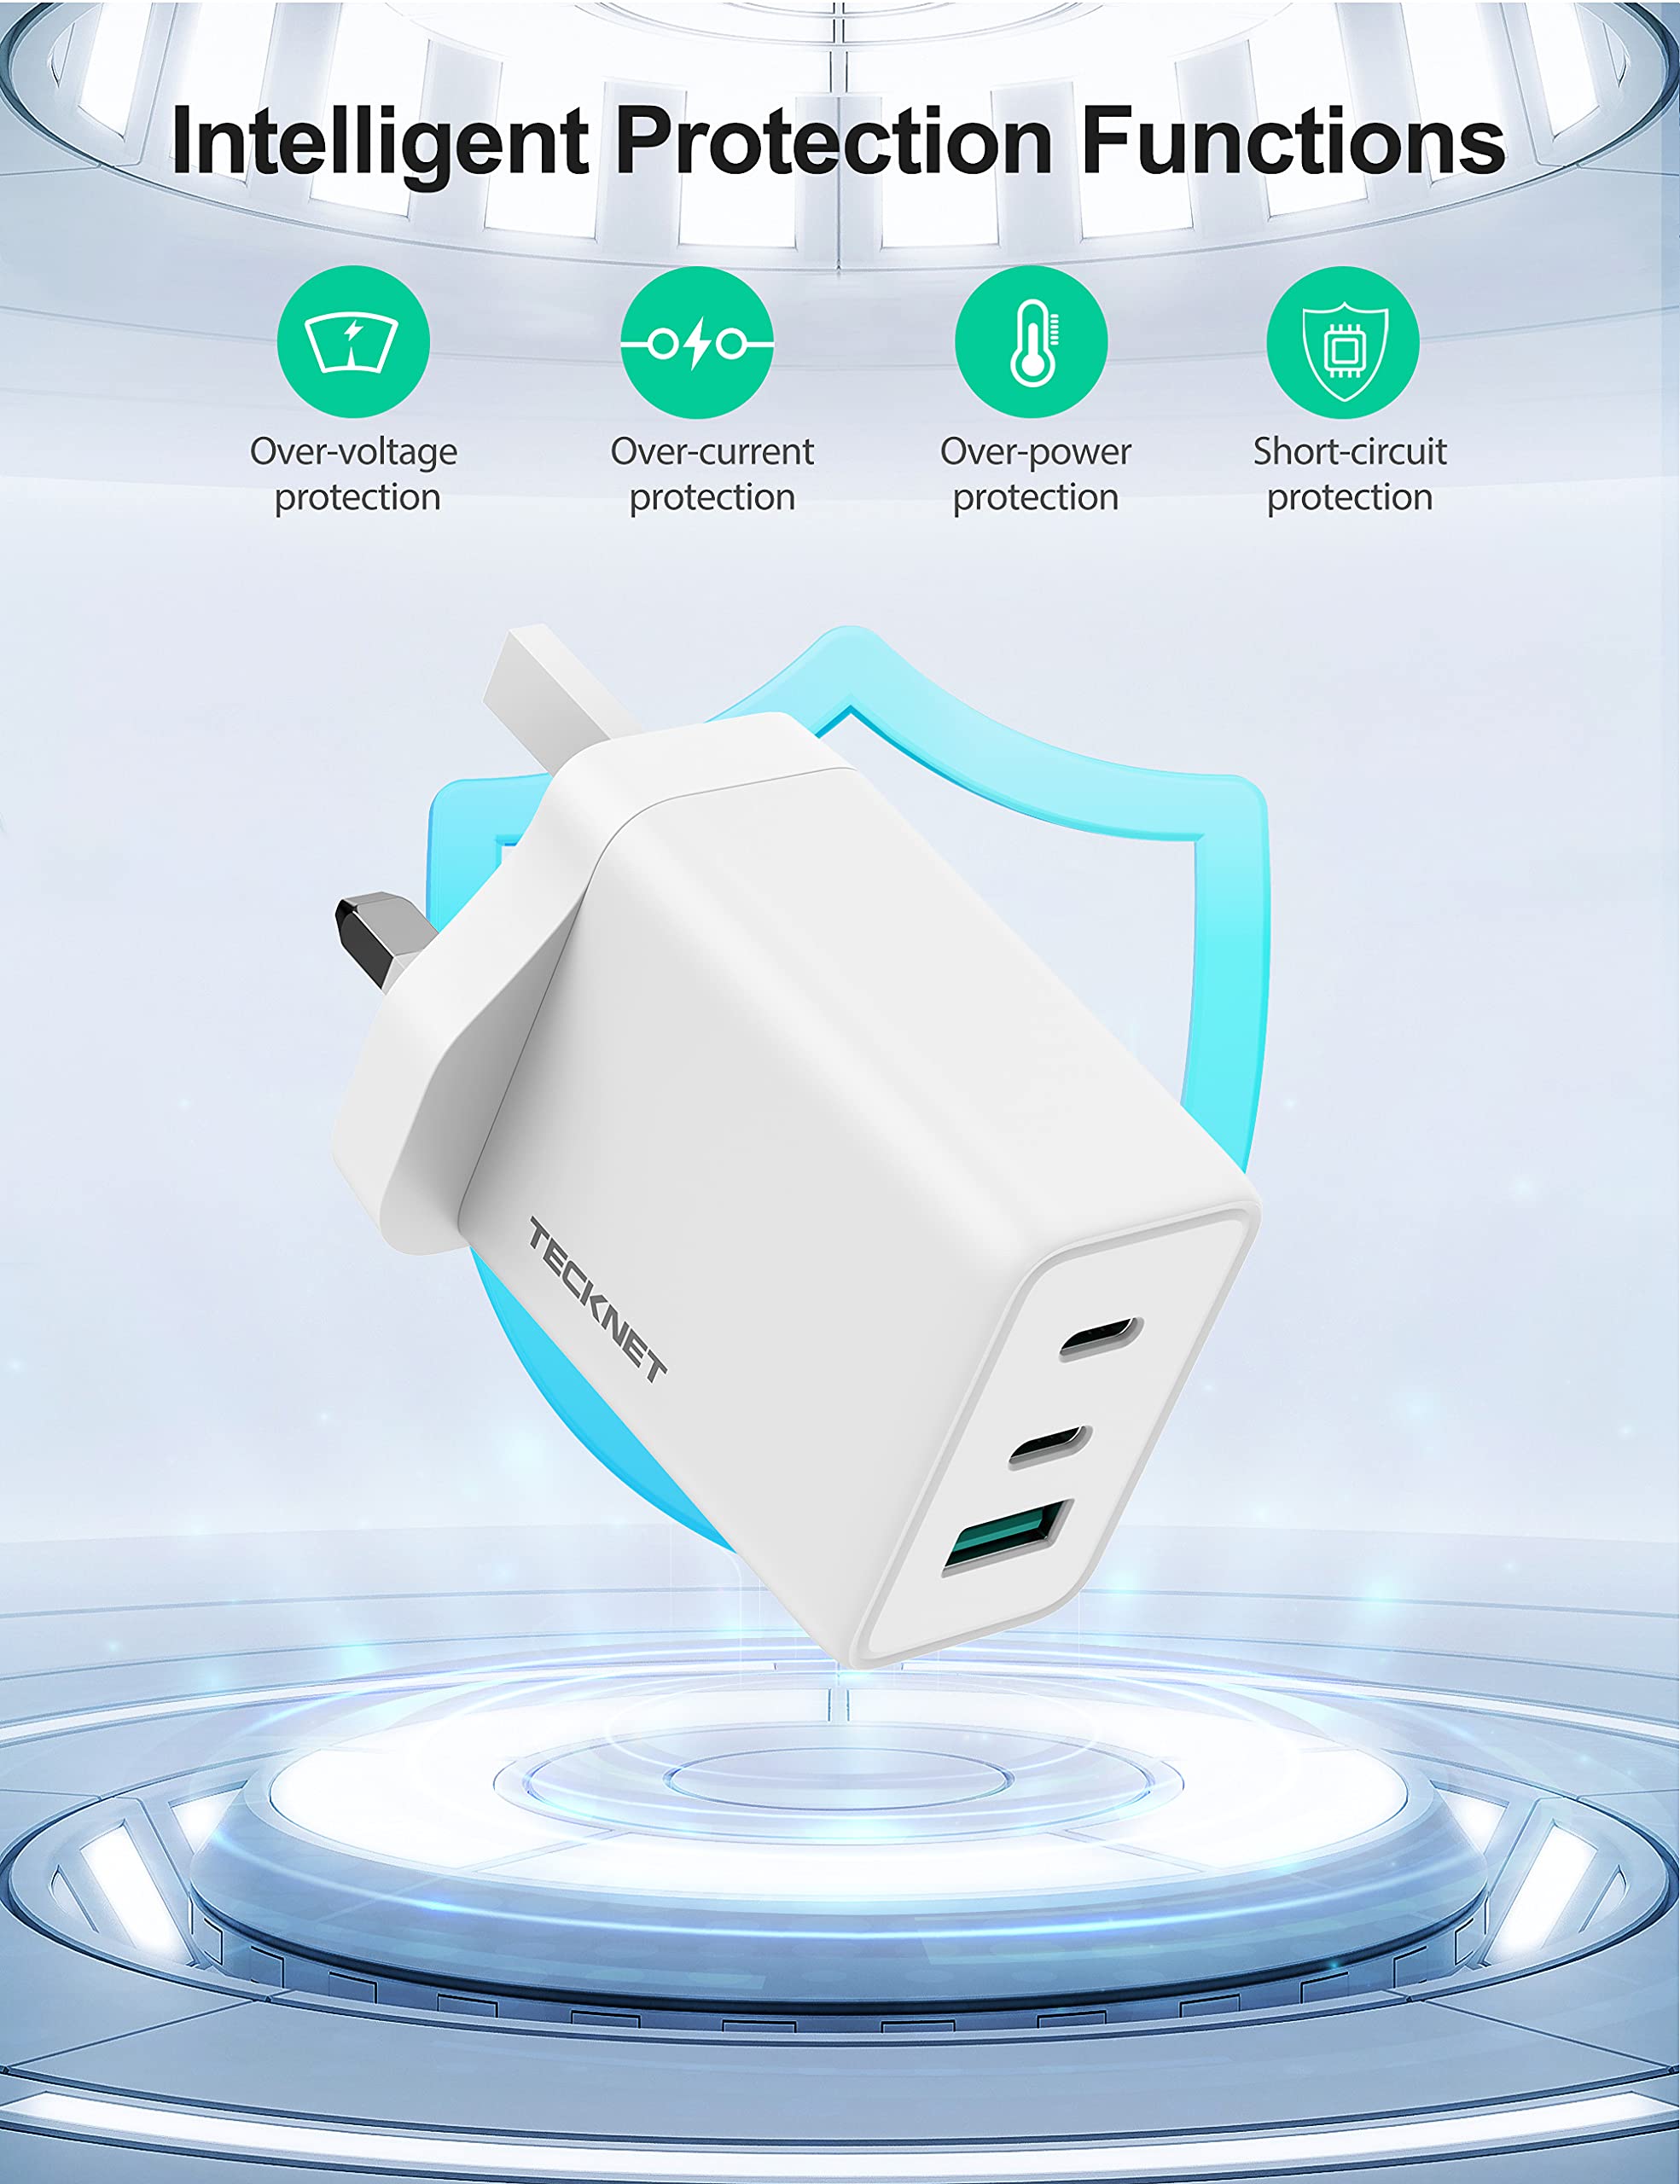 65W USB C Charger, TECKNET 3 Port GaN Type C Fast Charger Plug Adapter, PD 3.0 USB C Wall Quick Charger